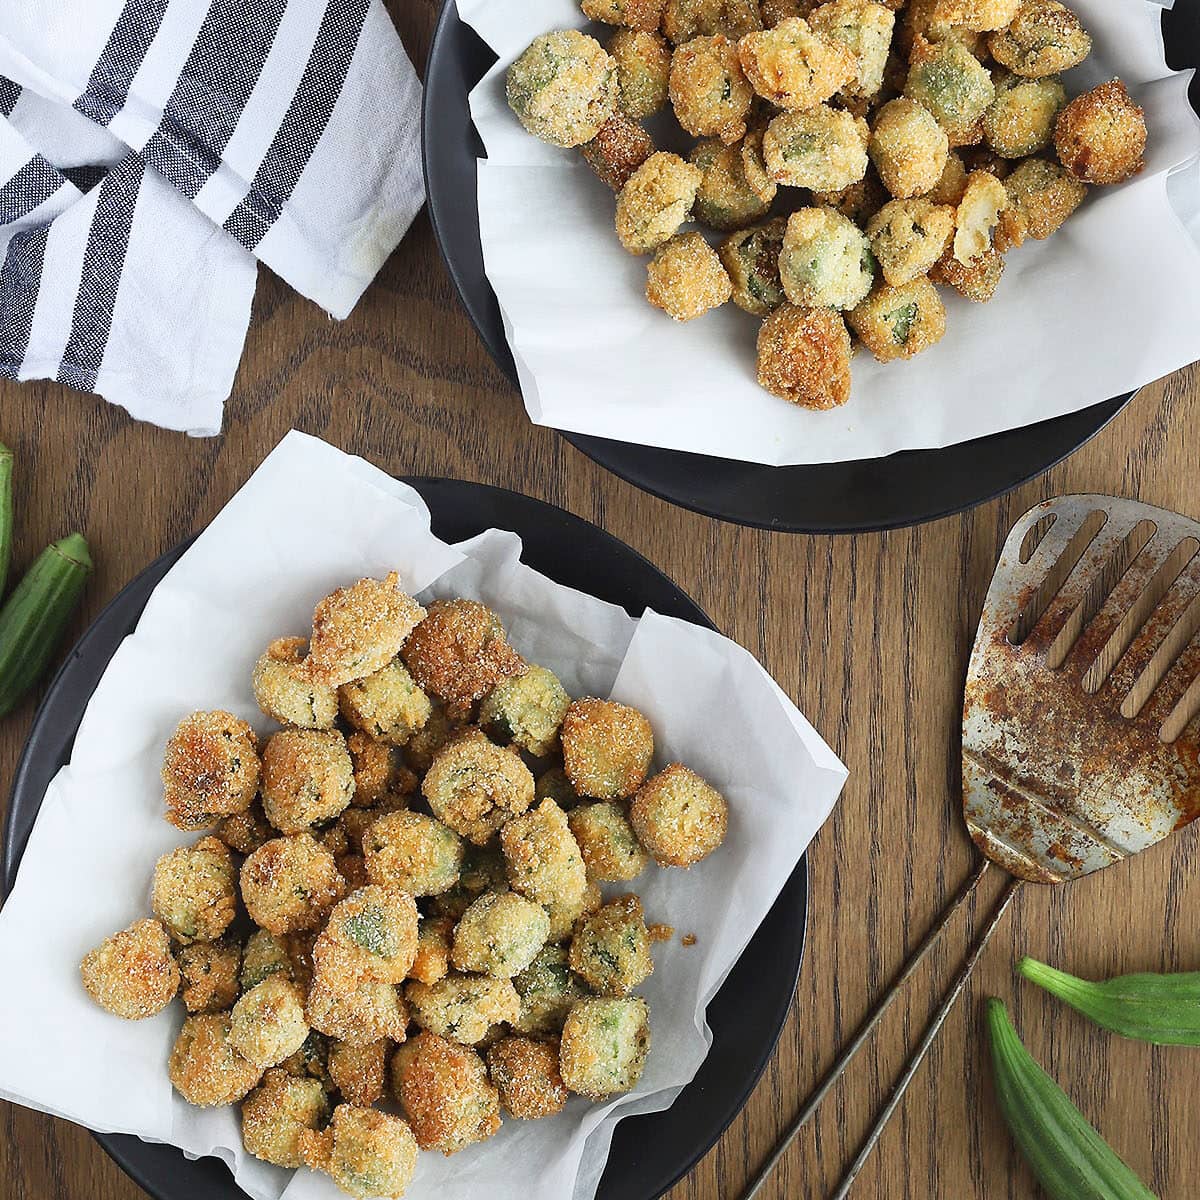 How to Make Fried Okra - The Cooking Bride